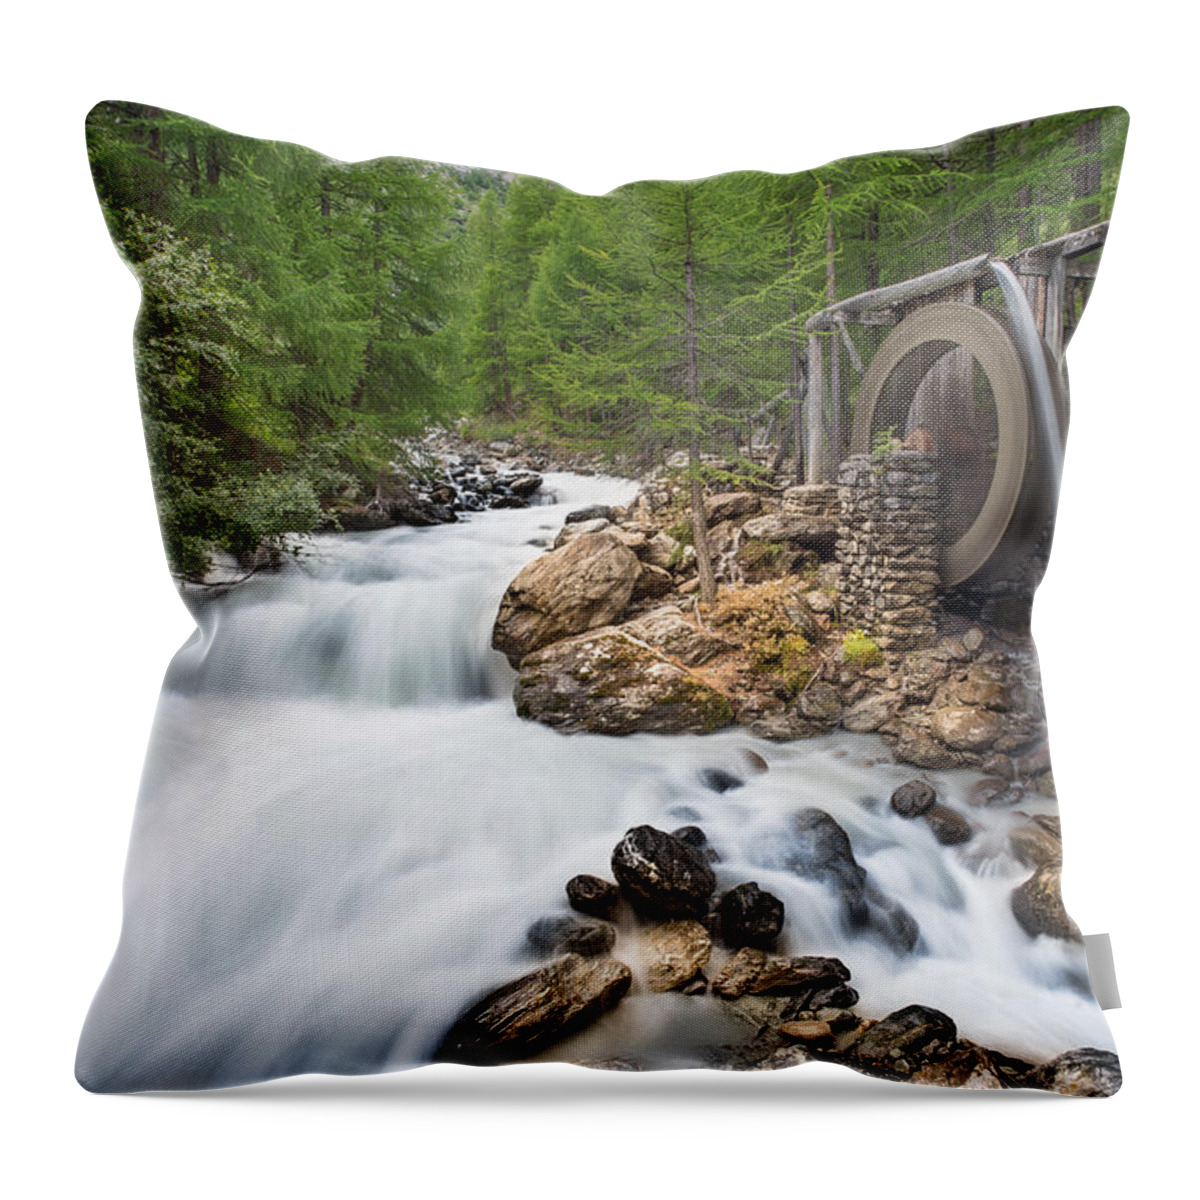 Waterwheel Throw Pillow featuring the photograph Waterwheel by James Billings